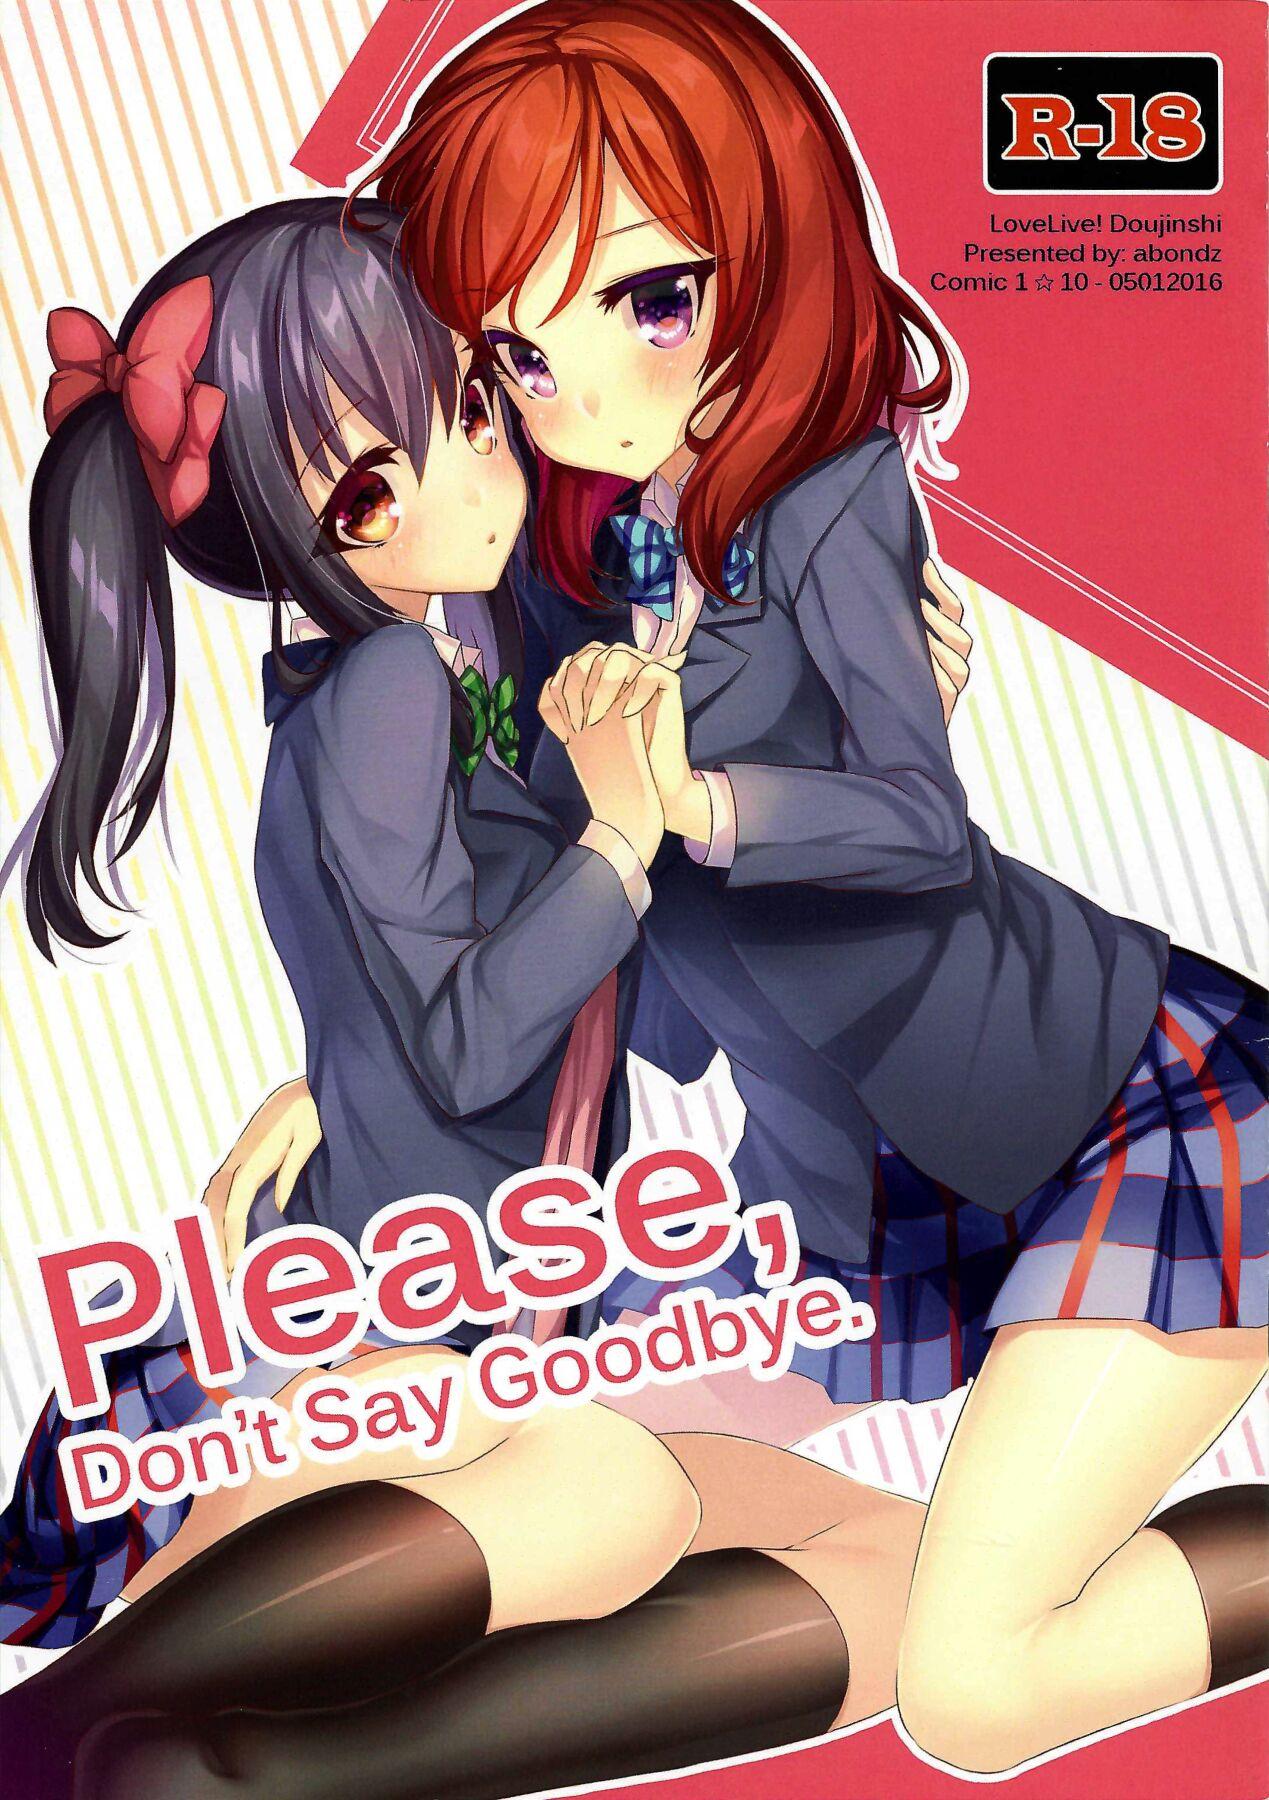 Pierced Please, Don't Say Goodbye - Love live Amature Sex Tapes - Page 1